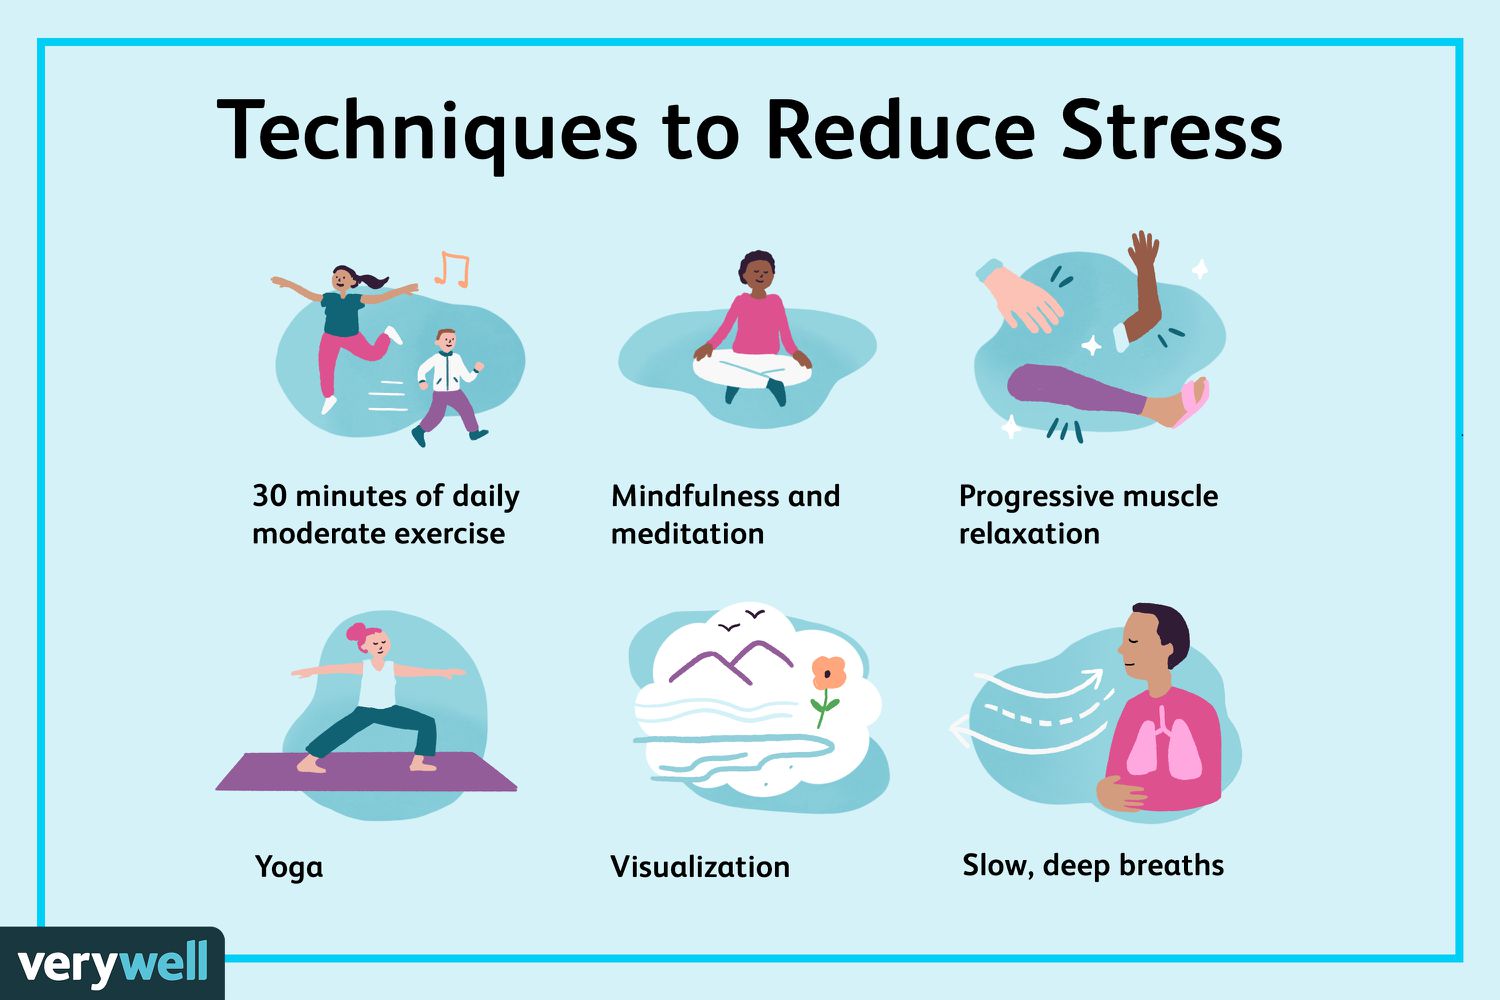 What is a strategy to reduce stress and anxiety?